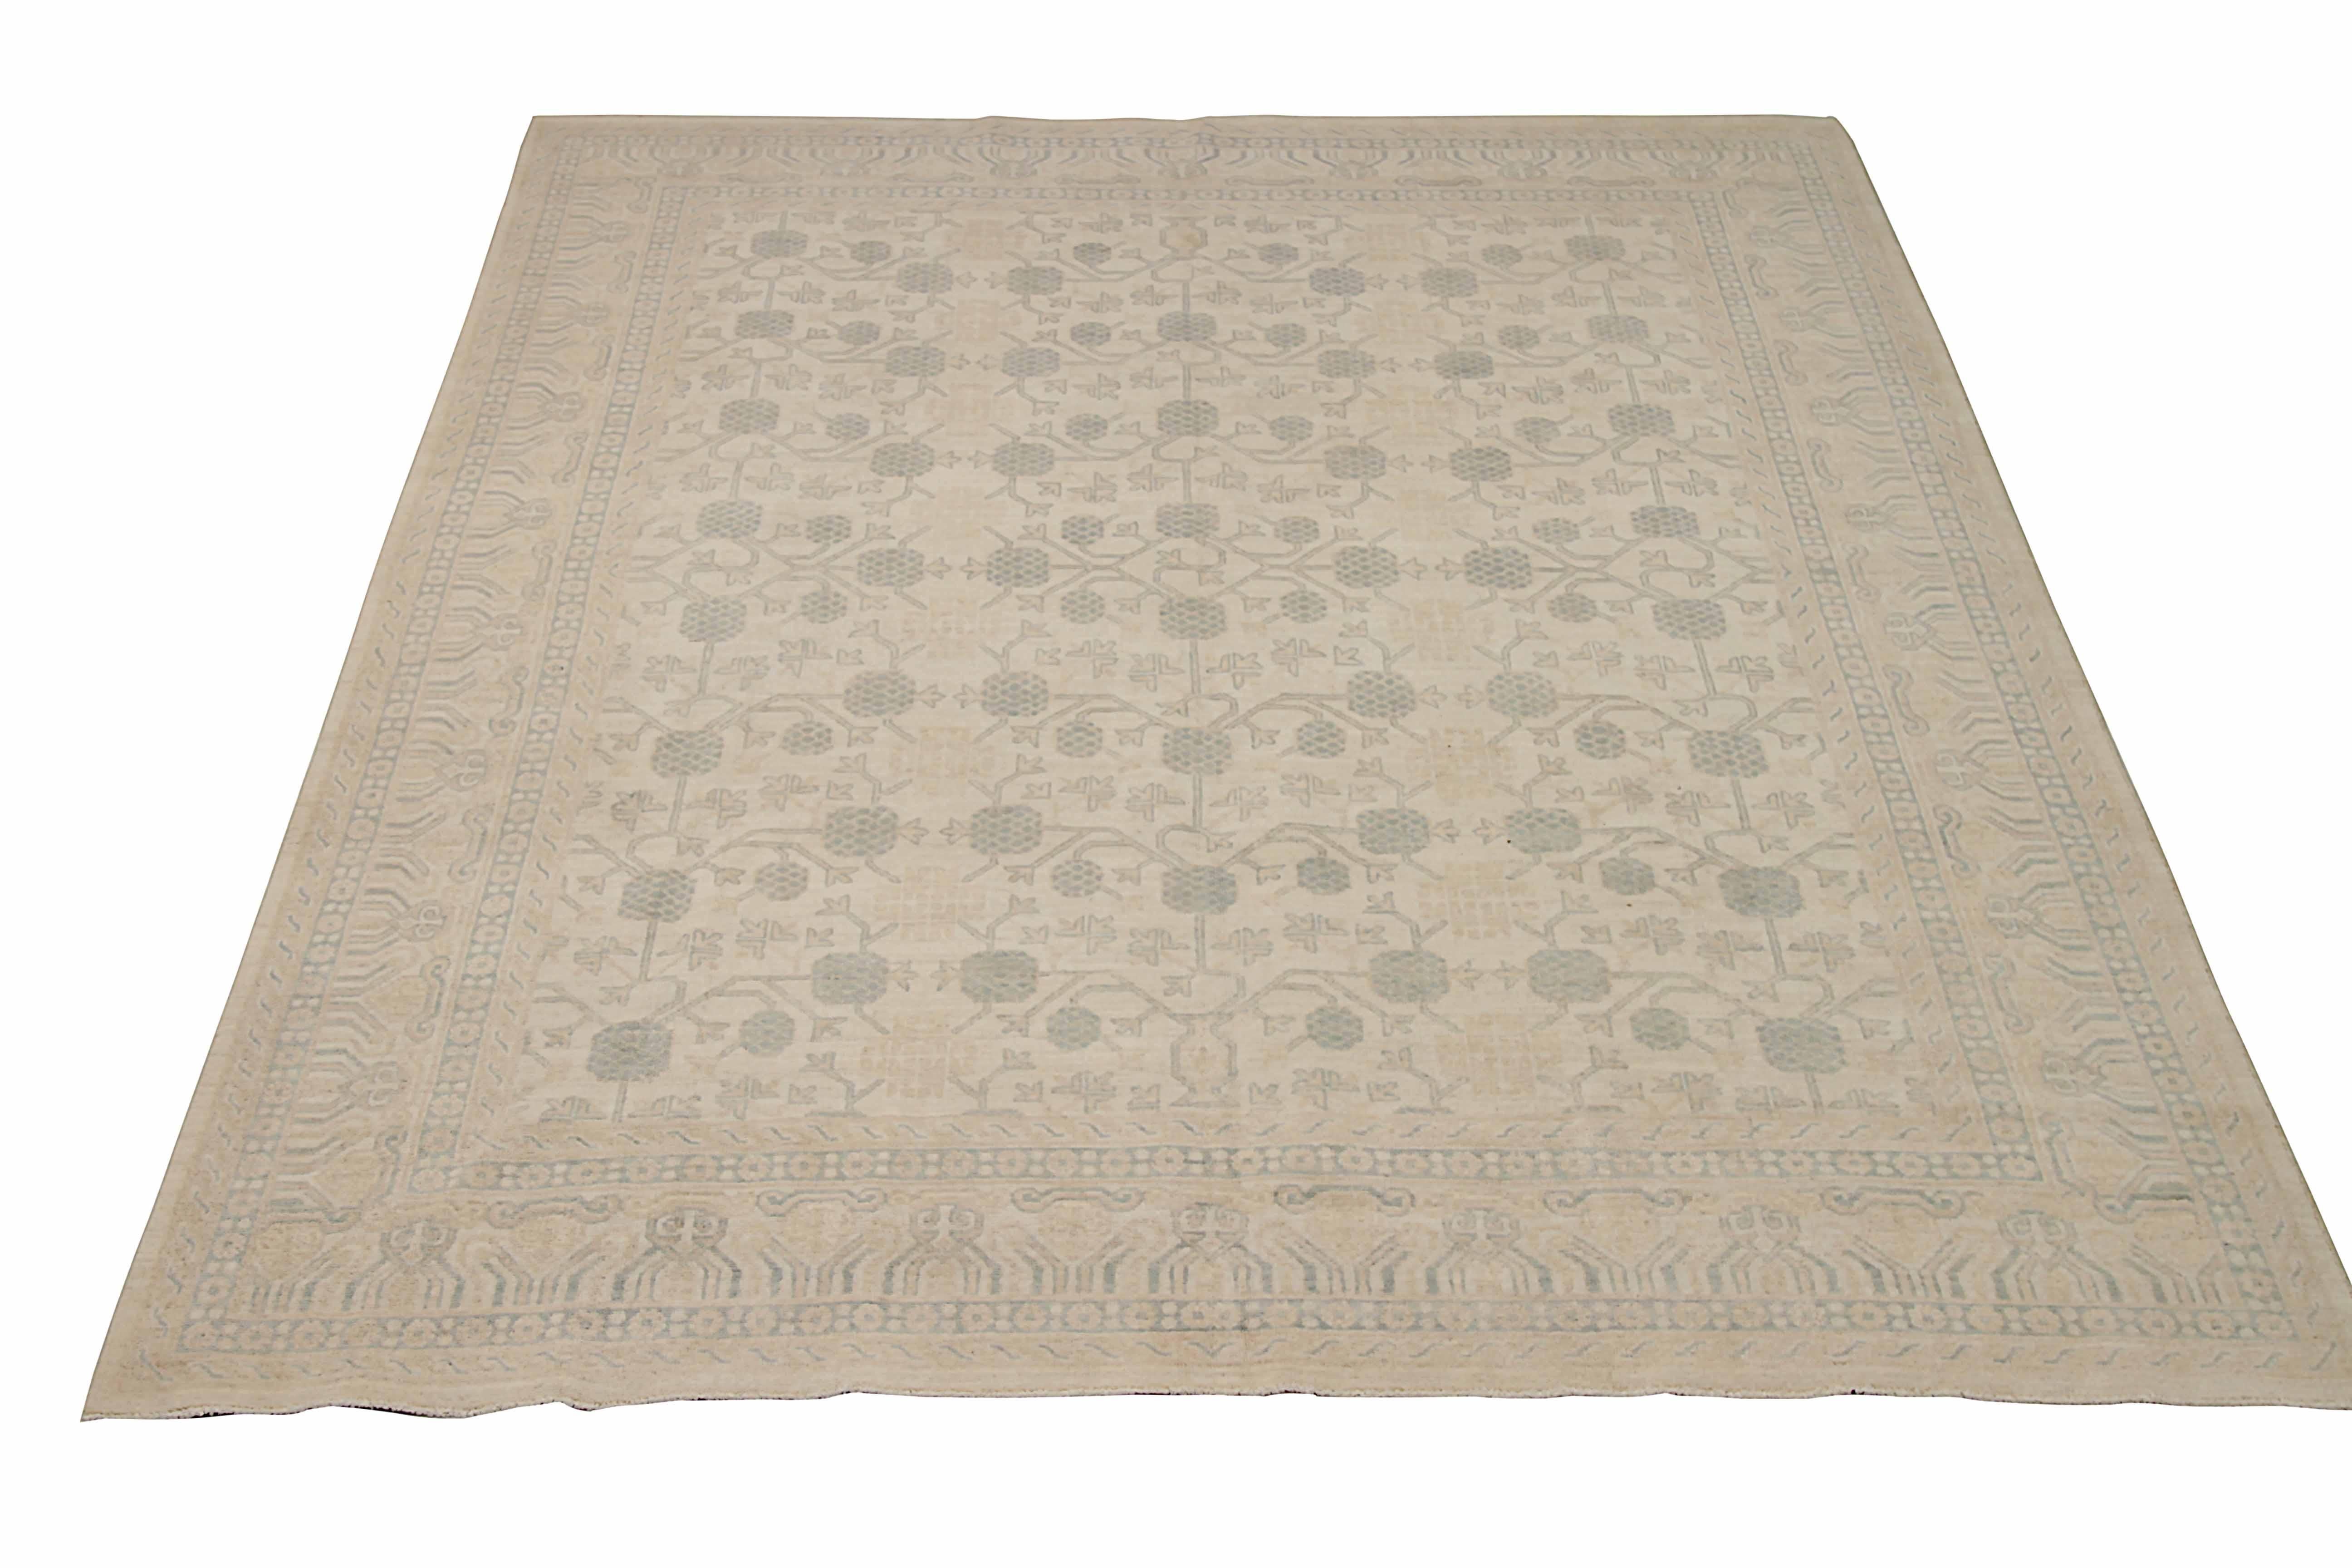 New Afghan area rug handwoven from the finest sheep’s wool. It’s colored with all-natural vegetable dyes that are safe for humans and pets. It’s a traditional Tabriz design woven by expert artisans. In addition to the fine weaving, this rug